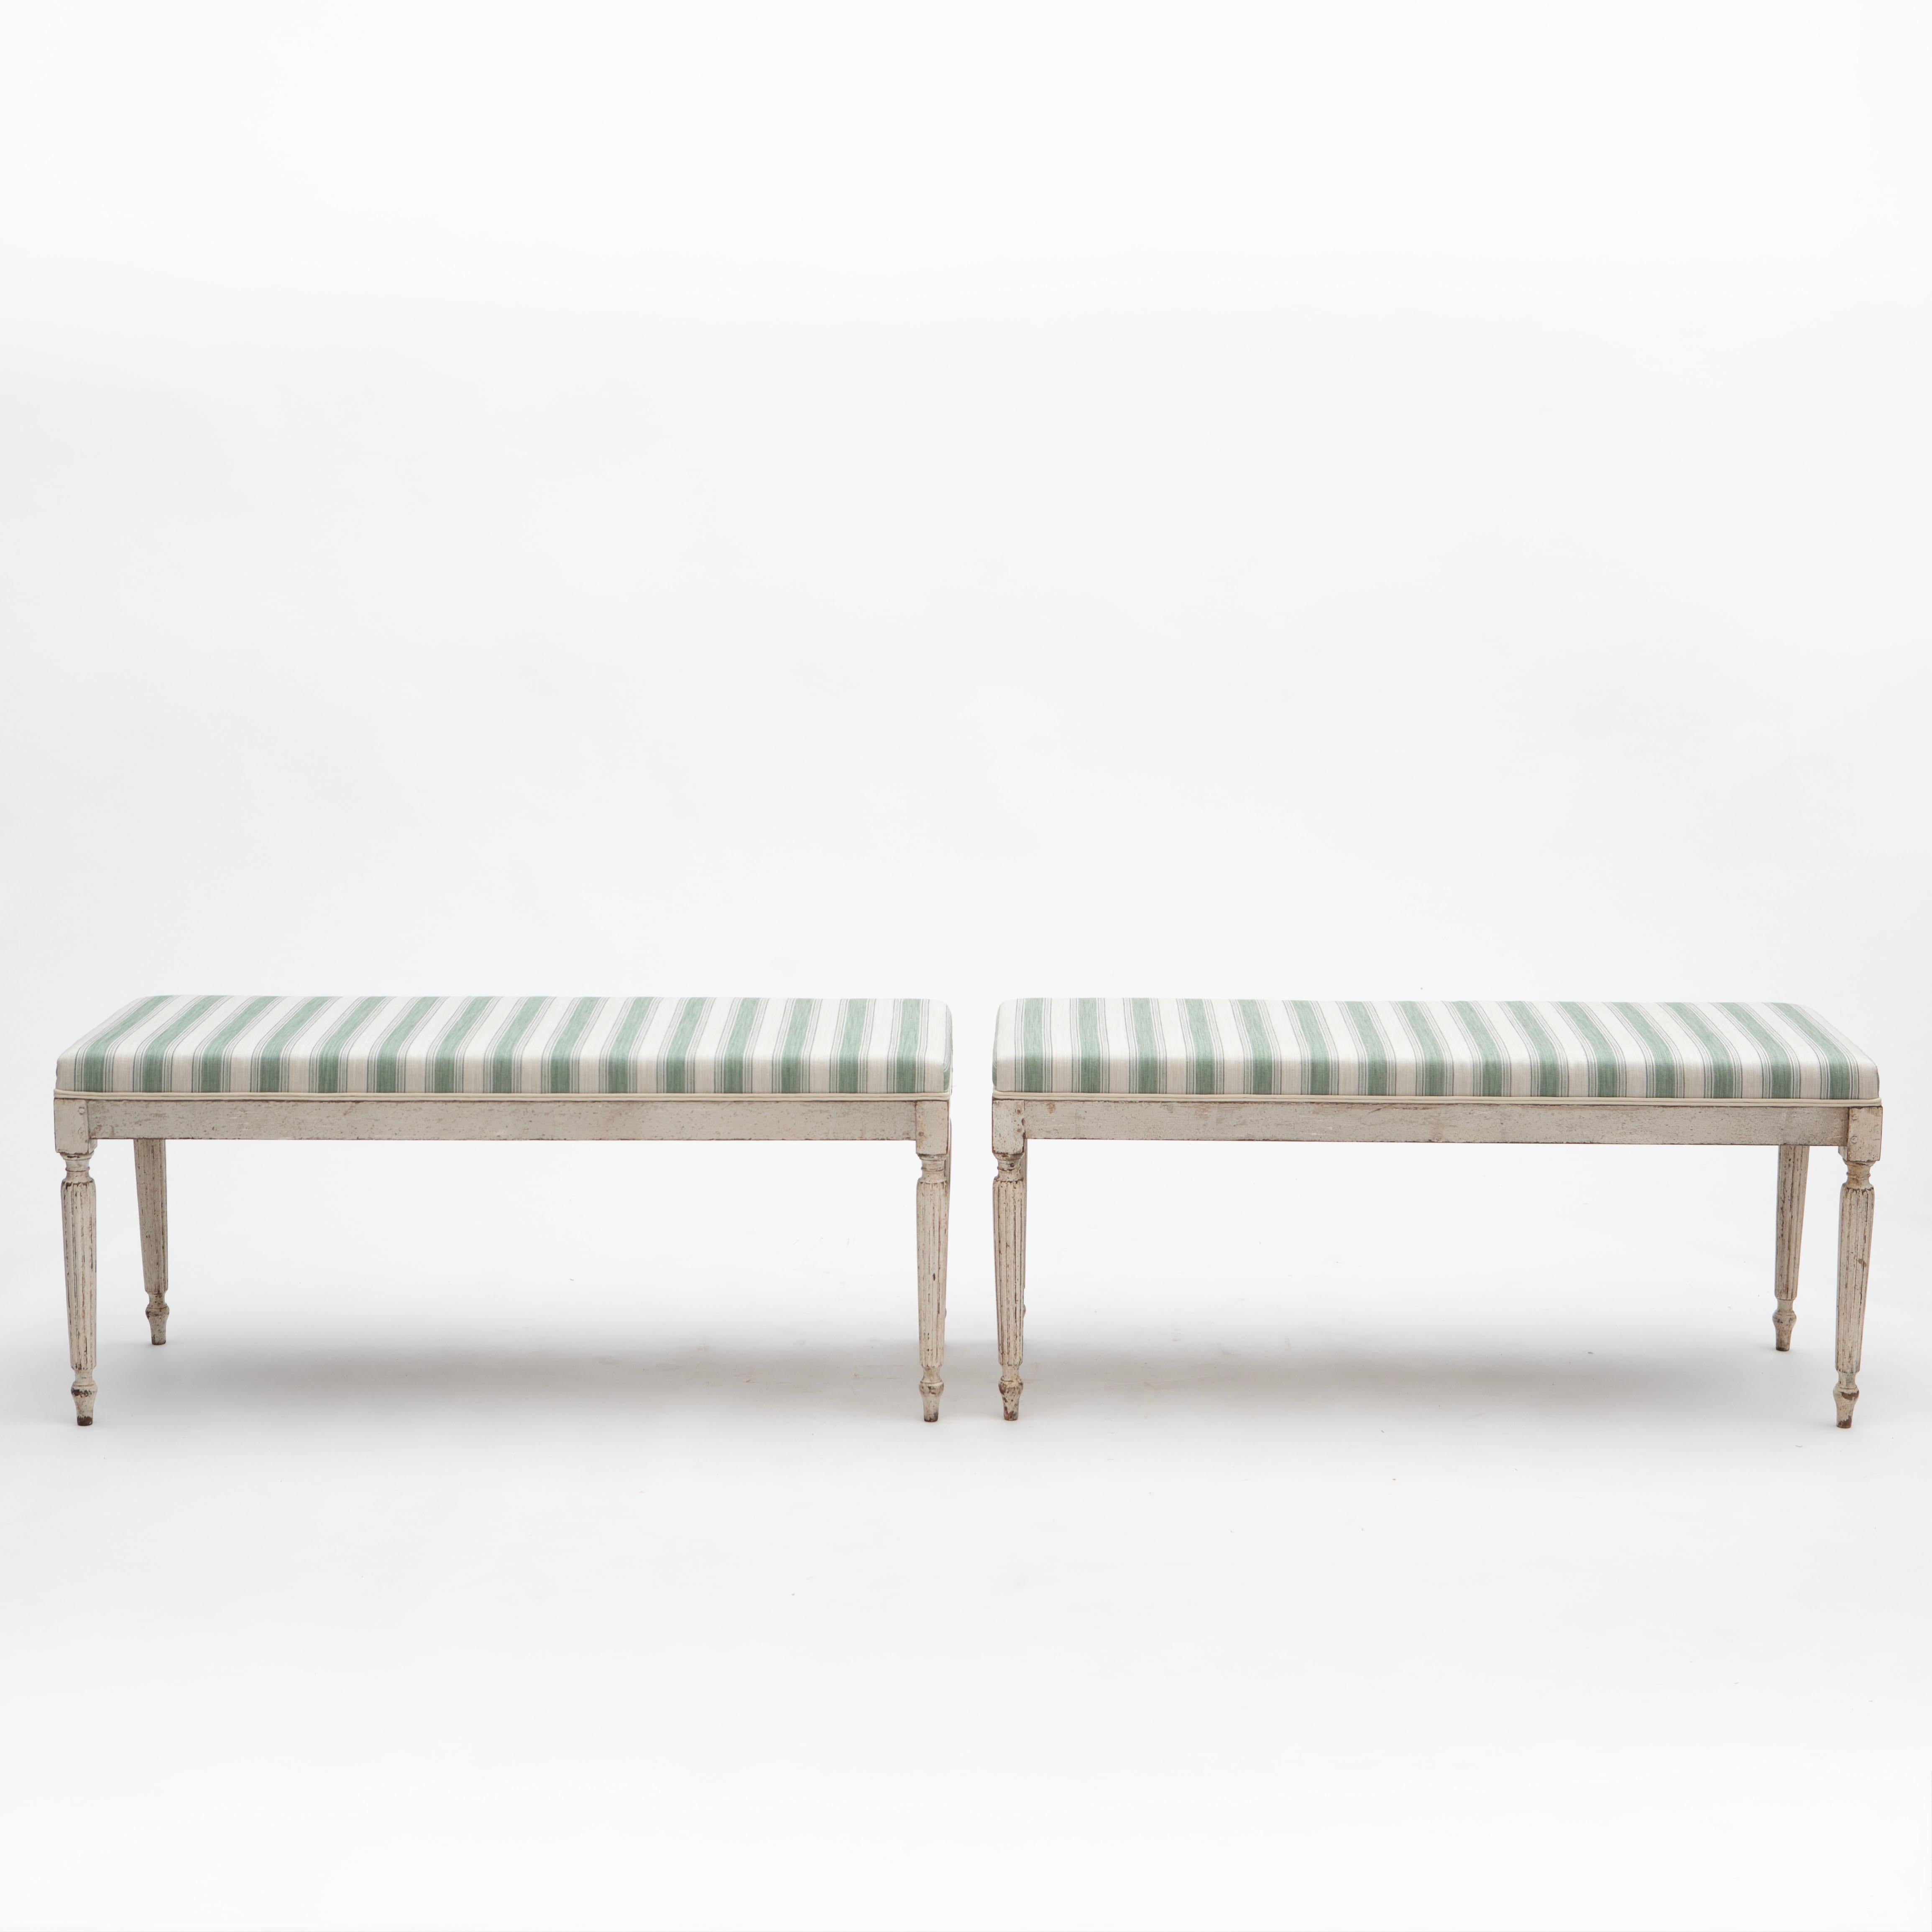 Danish Louis XVI Style Bench White Painted With Striped Fabric For Sale